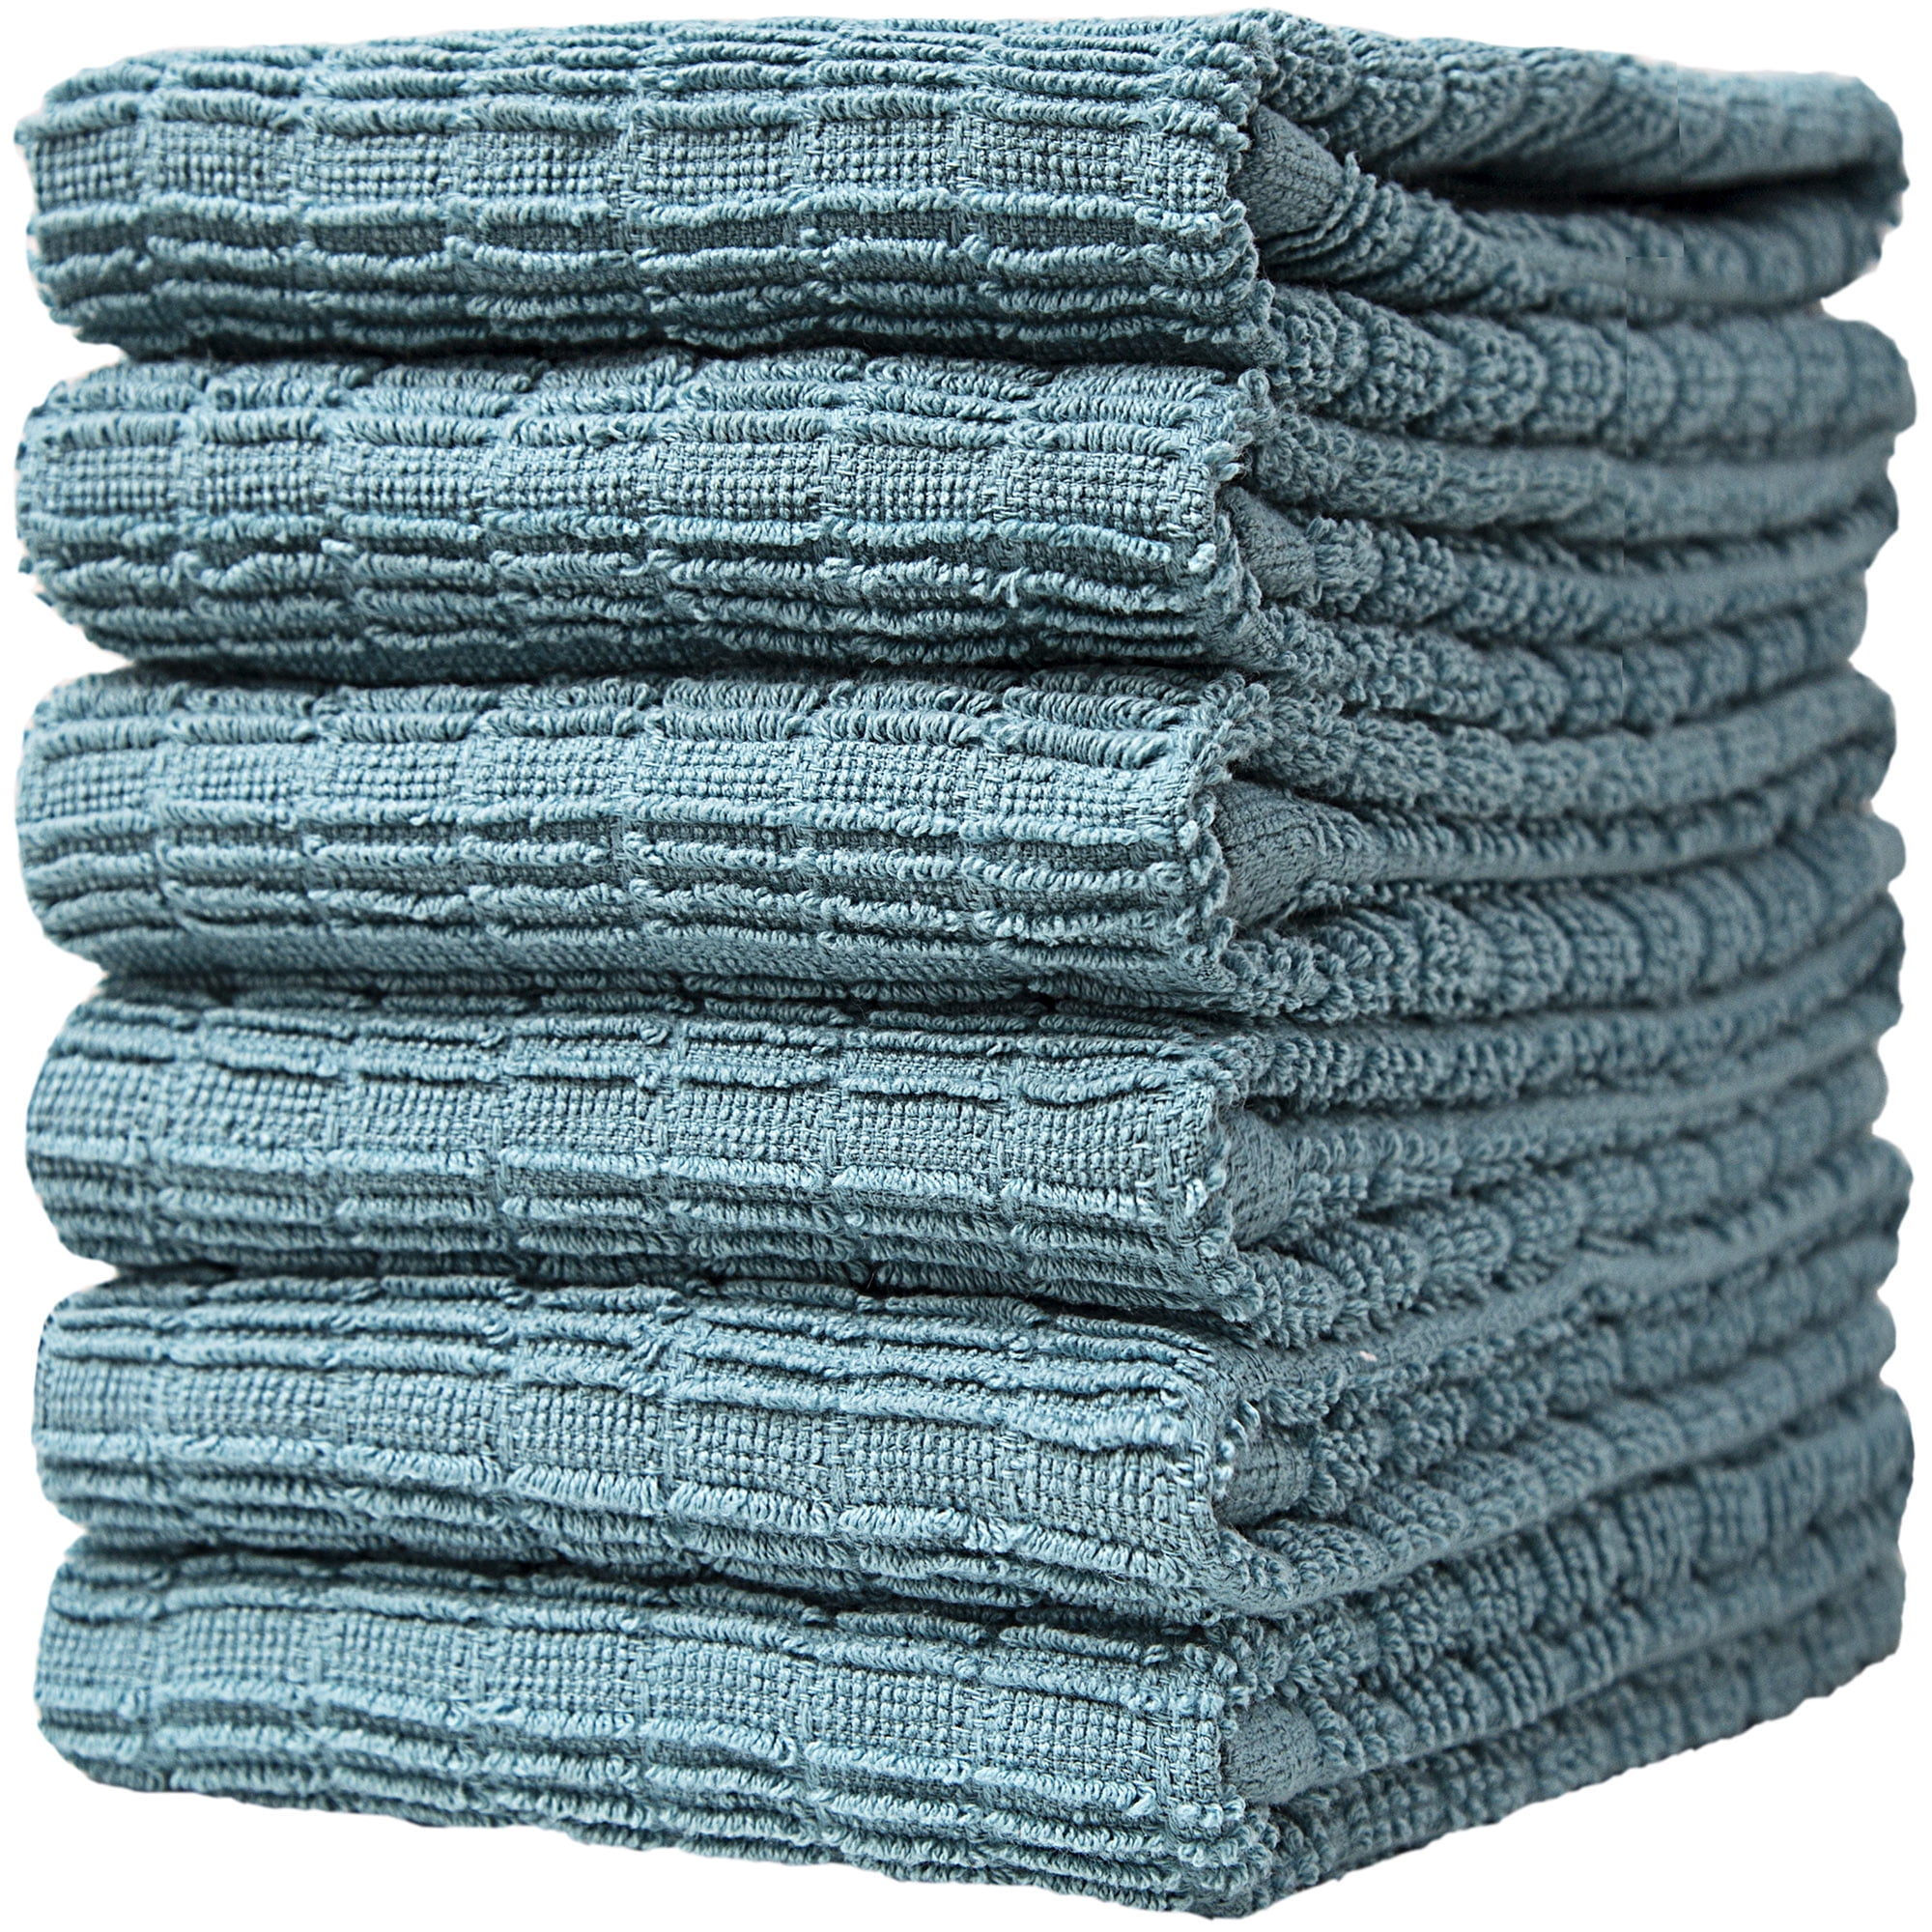 Details about   Pantry Kitchen Towels Set of 4 NEW 18x28 Inch 